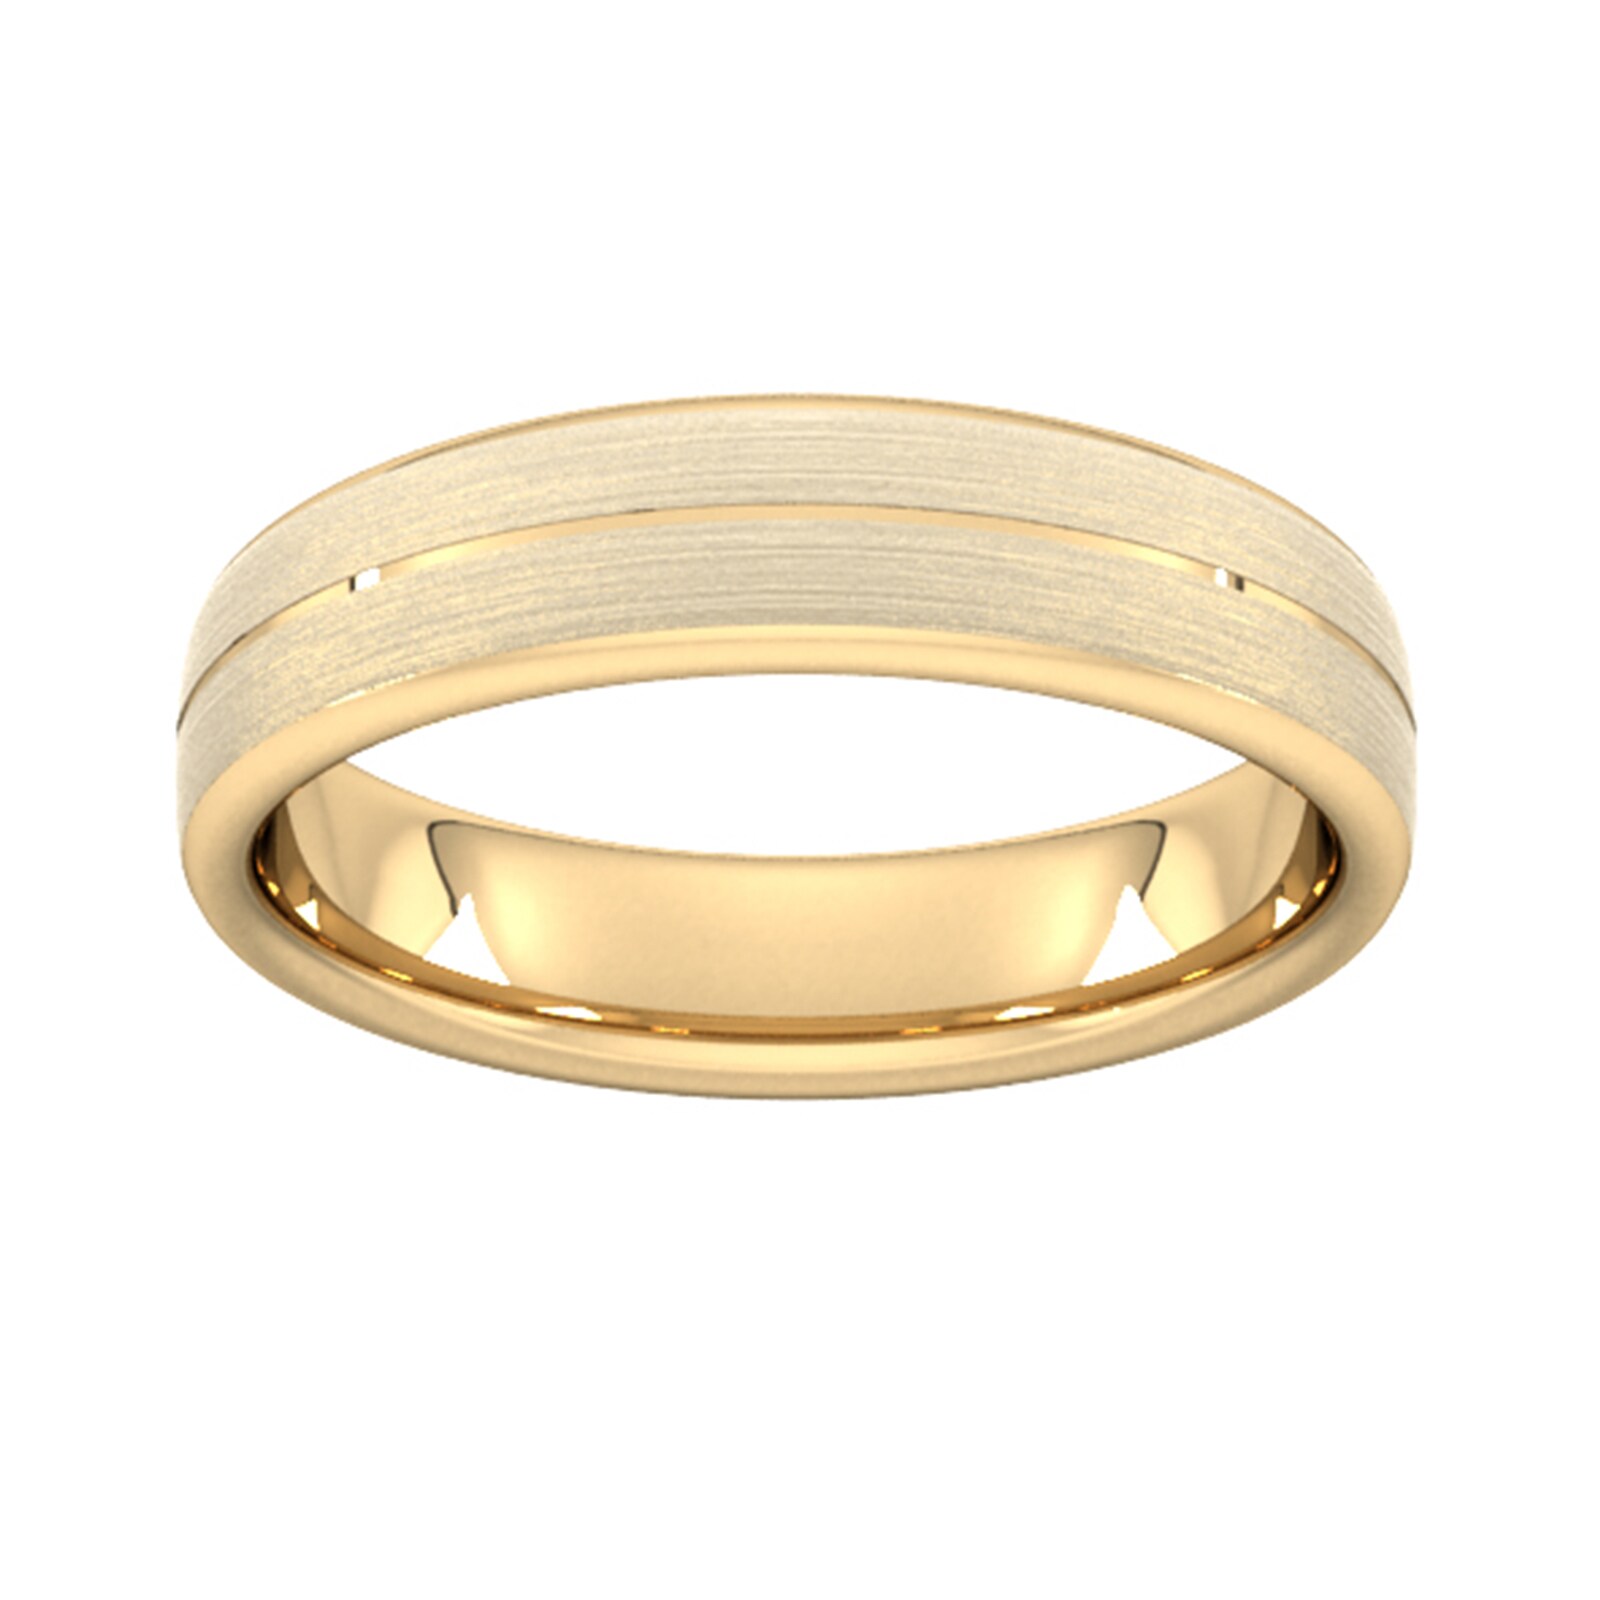 5mm D Shape Heavy Centre Groove With Chamfered Edge Wedding Ring In 9 Carat Yellow Gold - Ring Size X